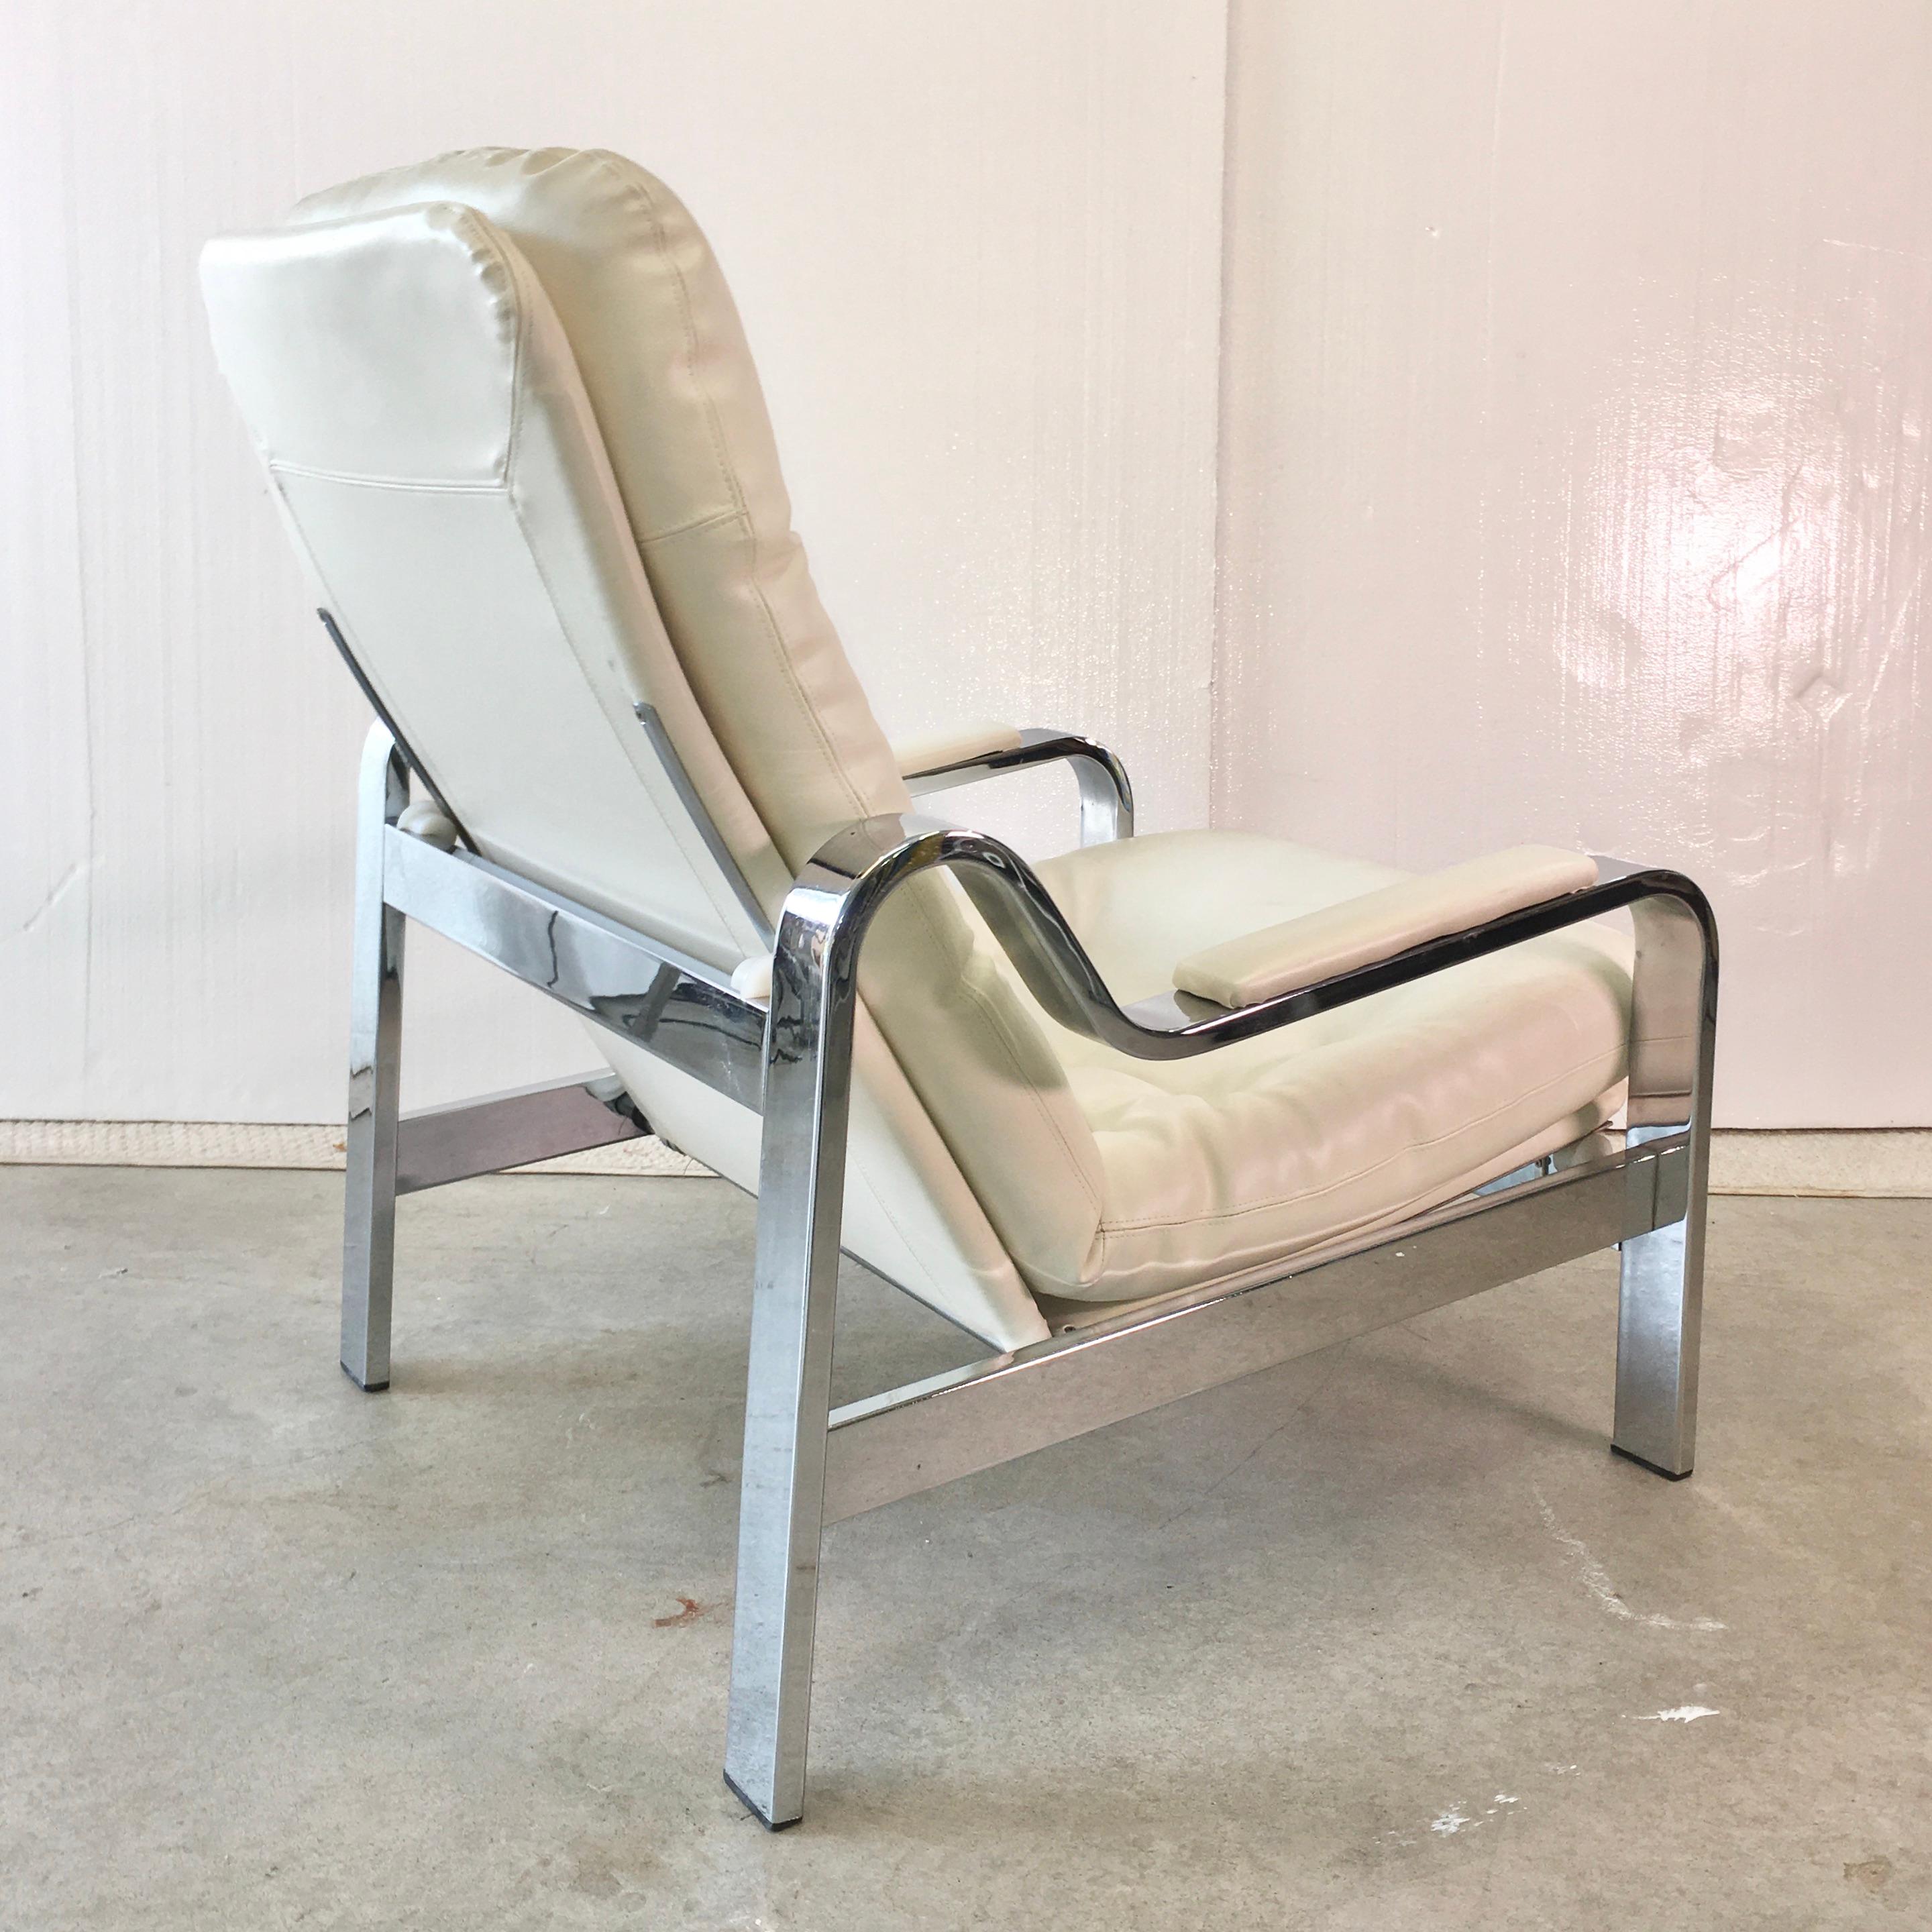 Selig 1970s Chrome Reclining Lounge Chair with Ottoman 8